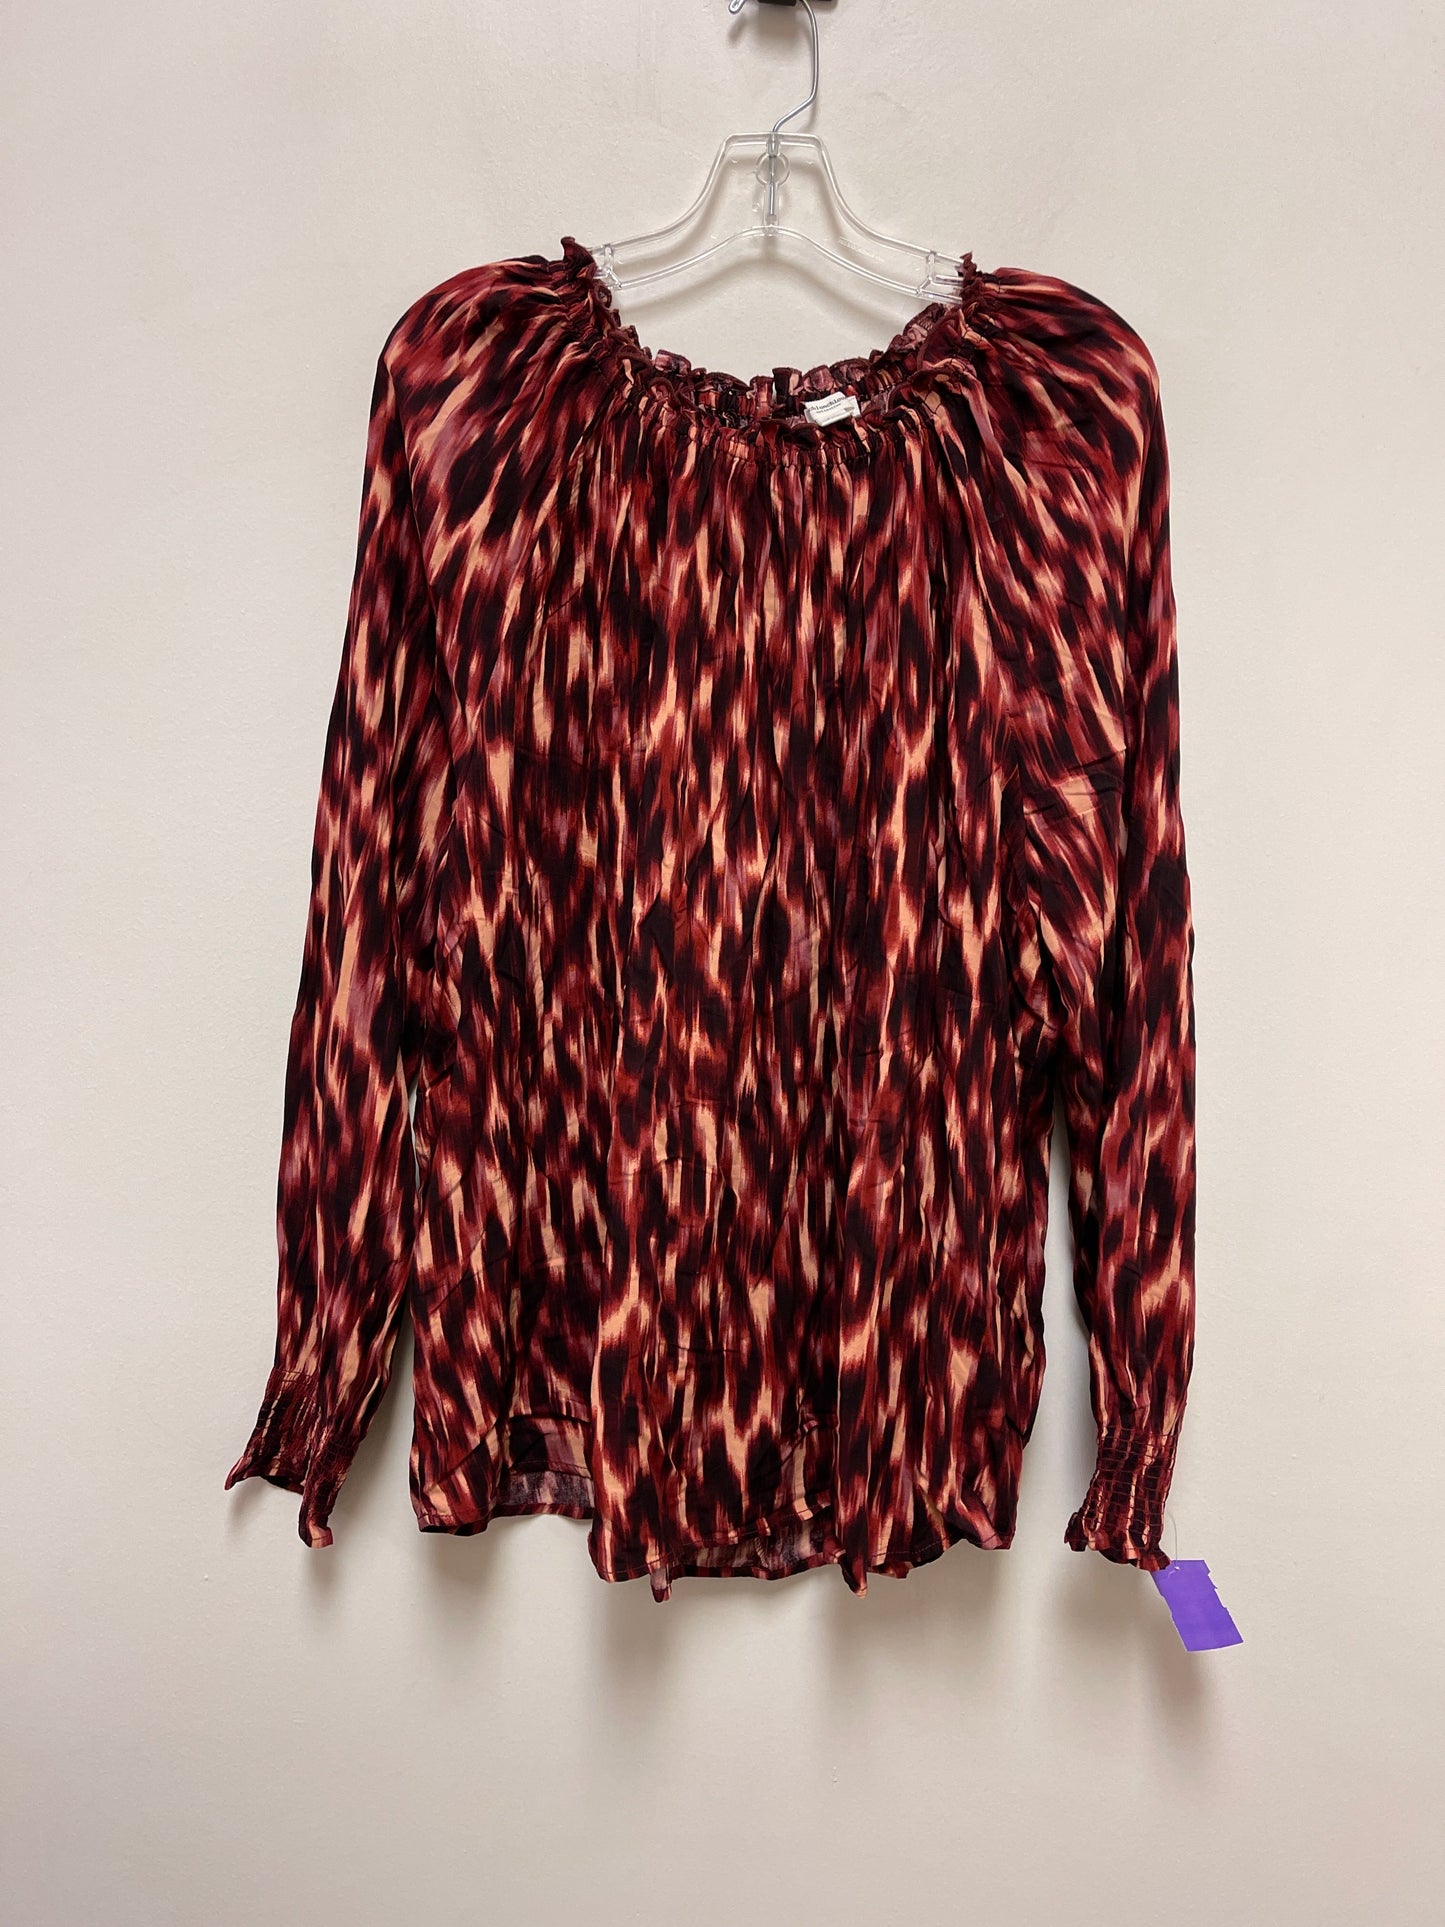 Red Top Long Sleeve Beachlunchlounge, Size L